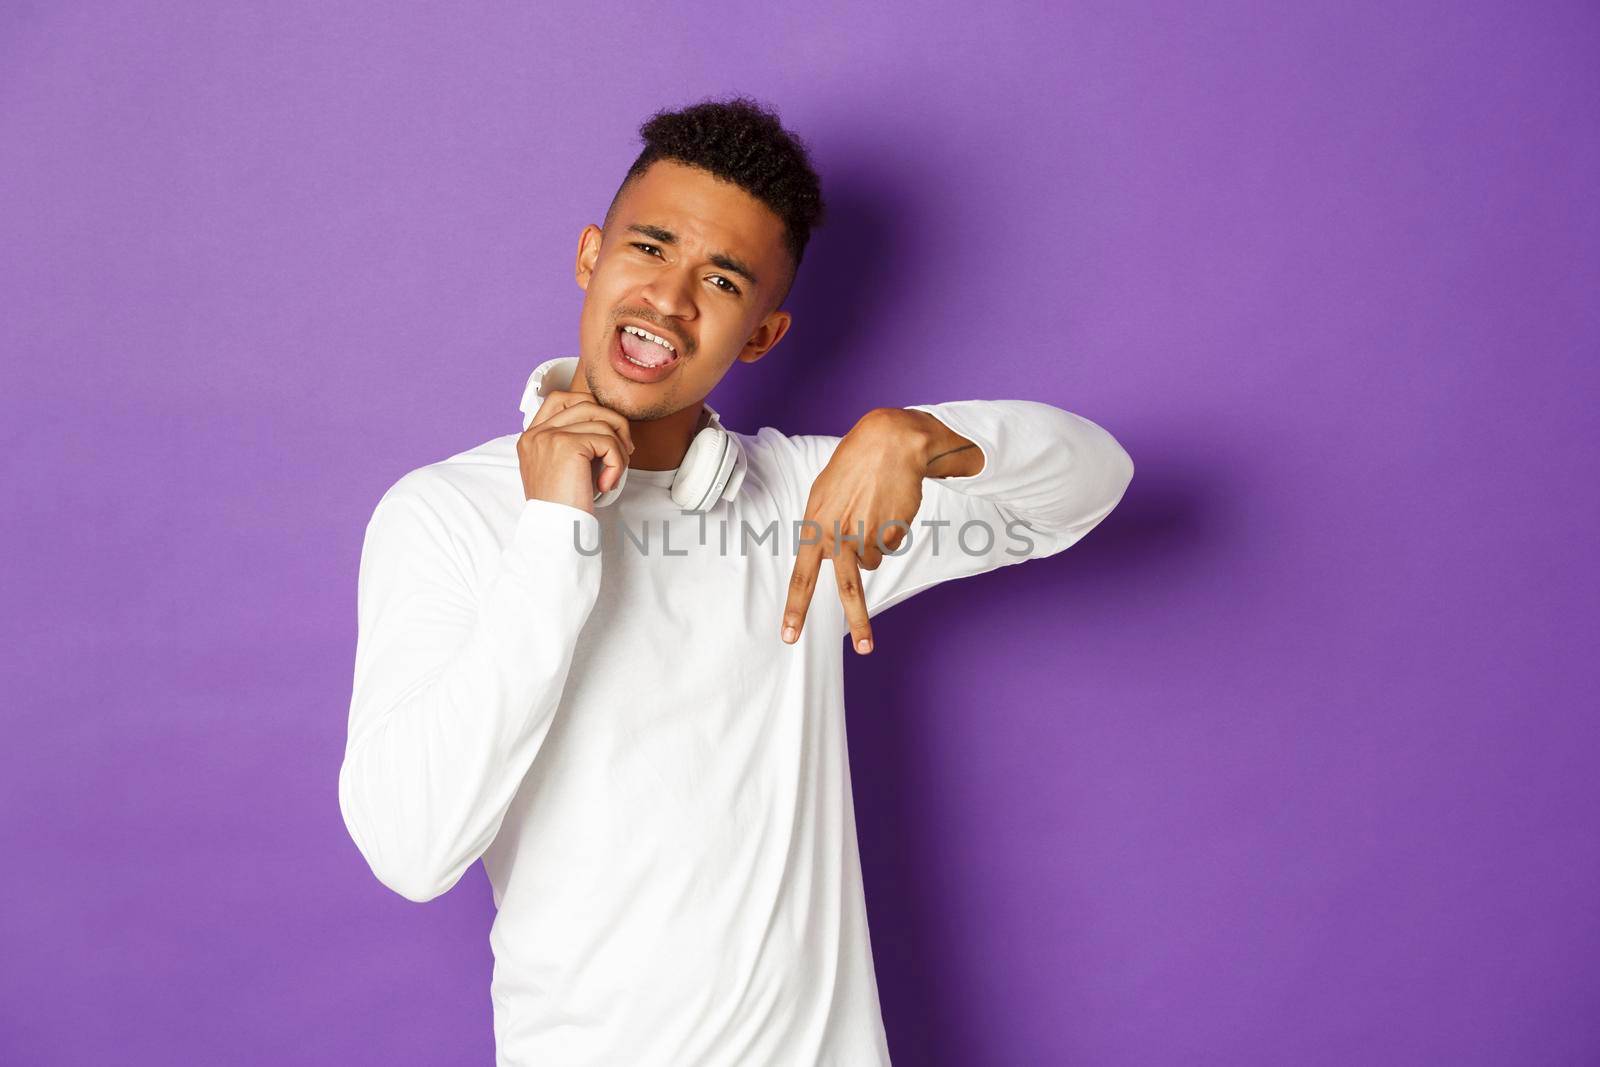 Image of sassy and cool african-american man, take-off headphones and showing hip hop gesture, standing over purple background.